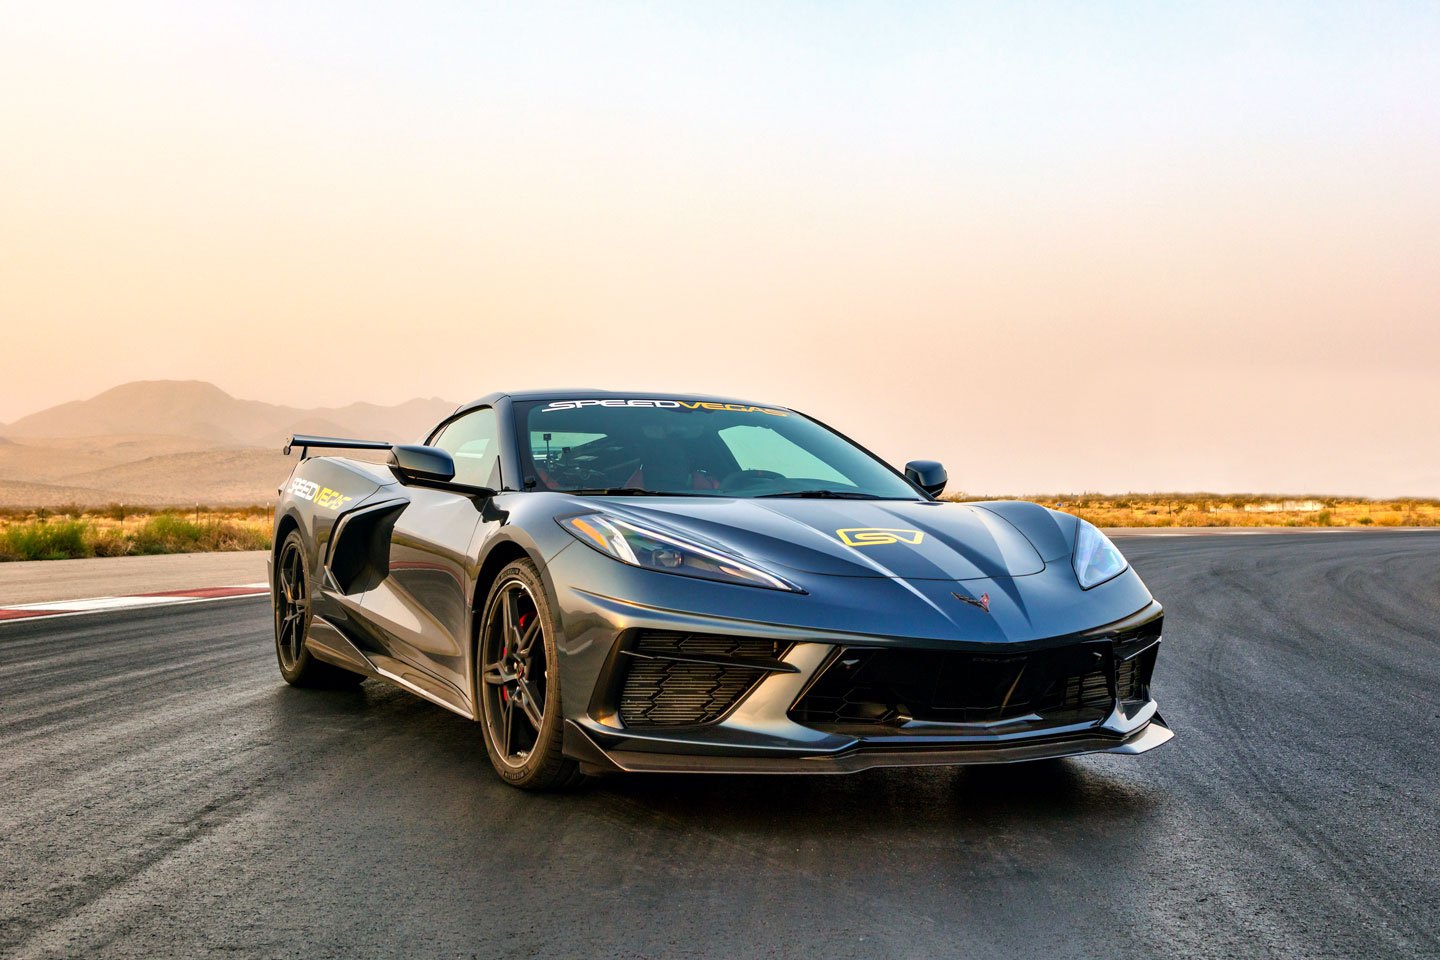 XPEL Helps Protect Supercars in Las Vegas - Speed Vegas - Chevy C8 Corvette